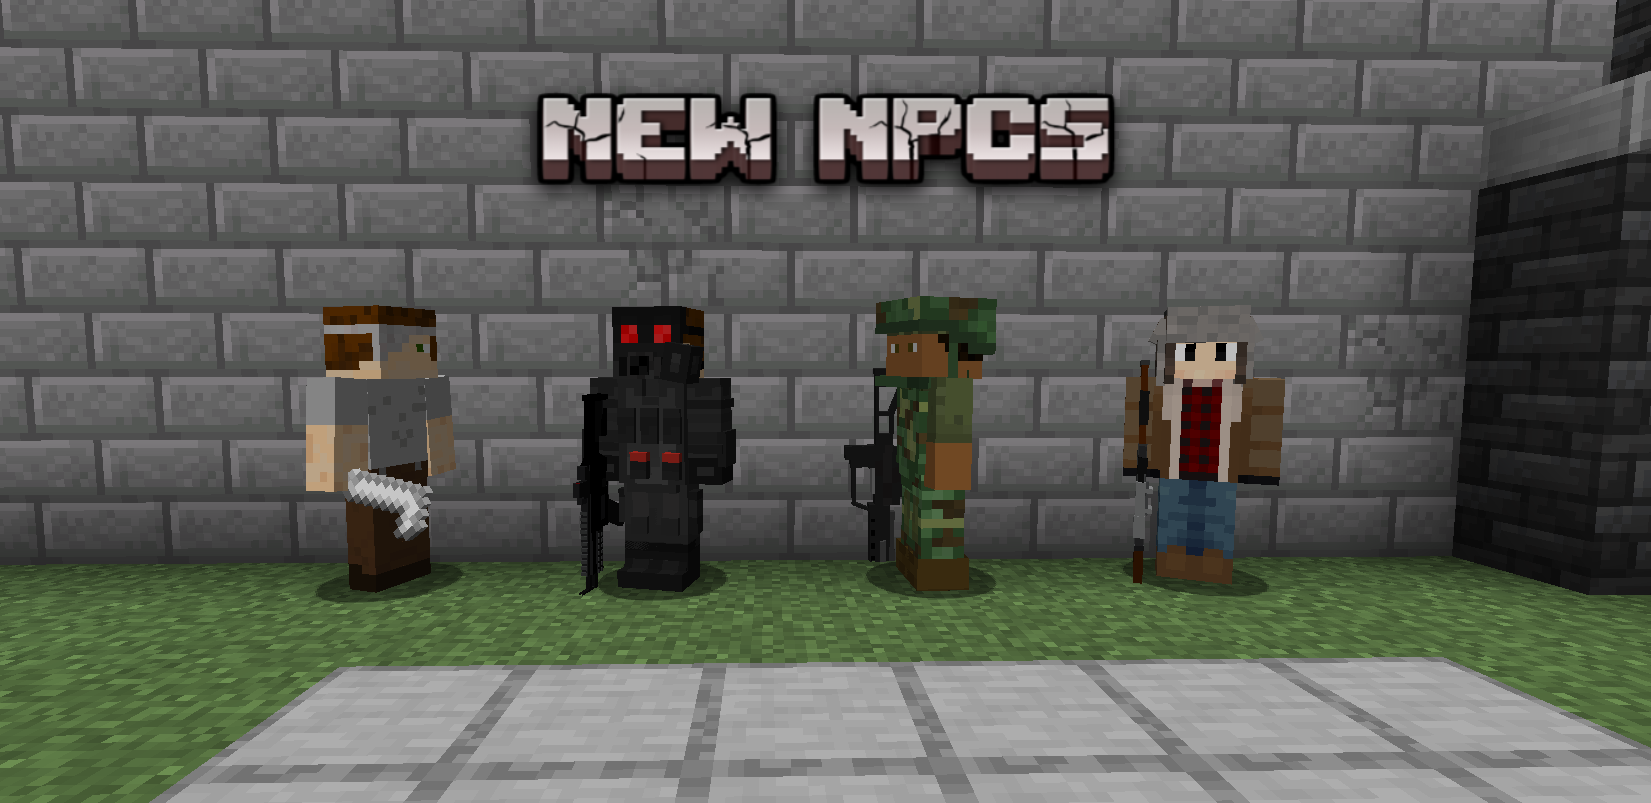 New npcs to find around your world